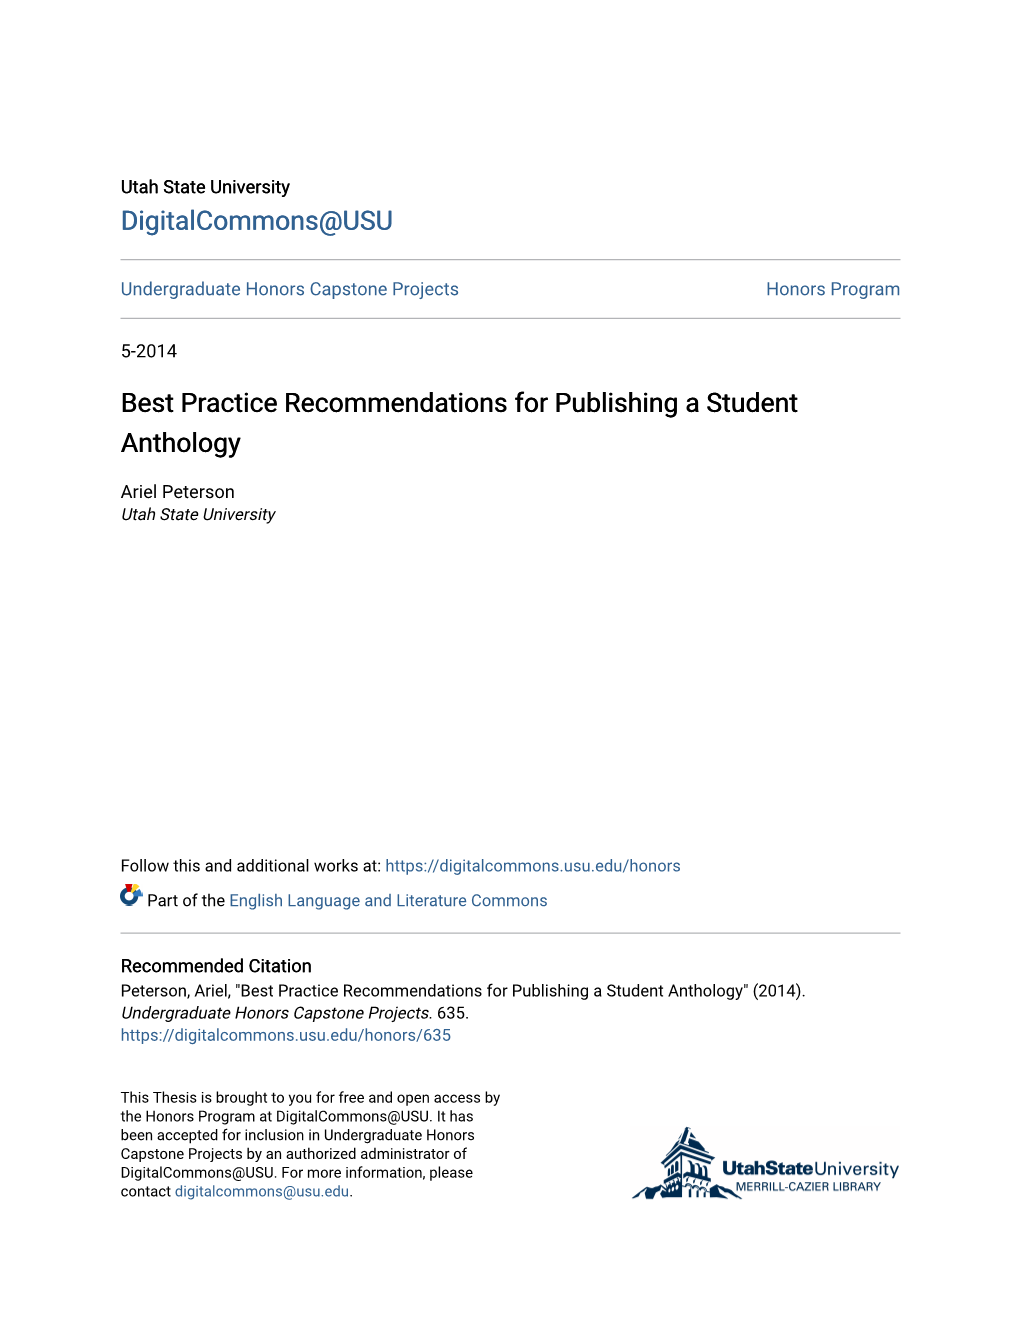 Best Practice Recommendations for Publishing a Student Anthology